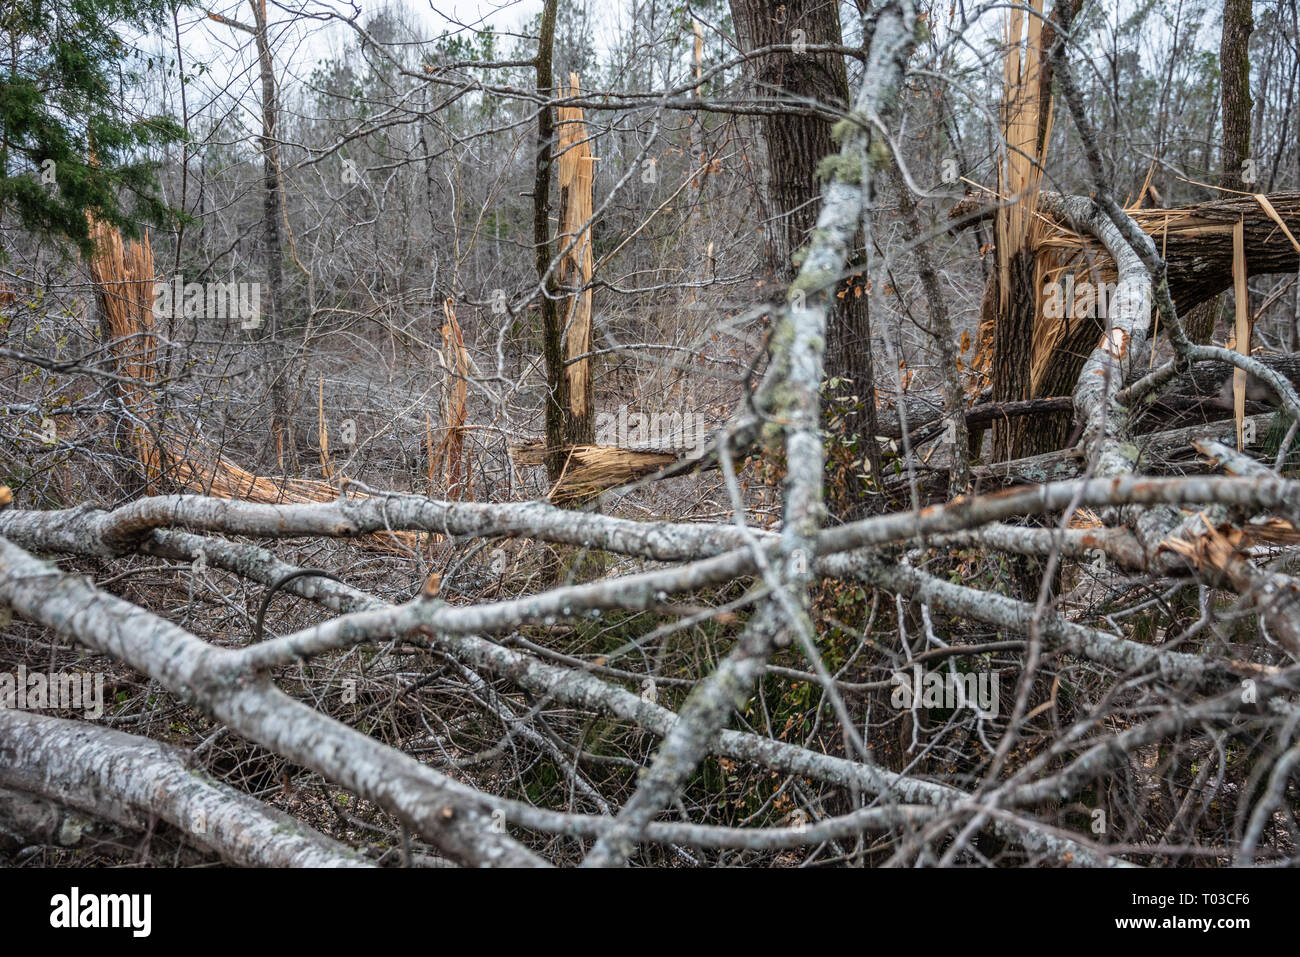 Snapped and downed trees from the deadly tornado that passed through Lee County, Alabama on March 3, 2019. (USA) Stock Photo